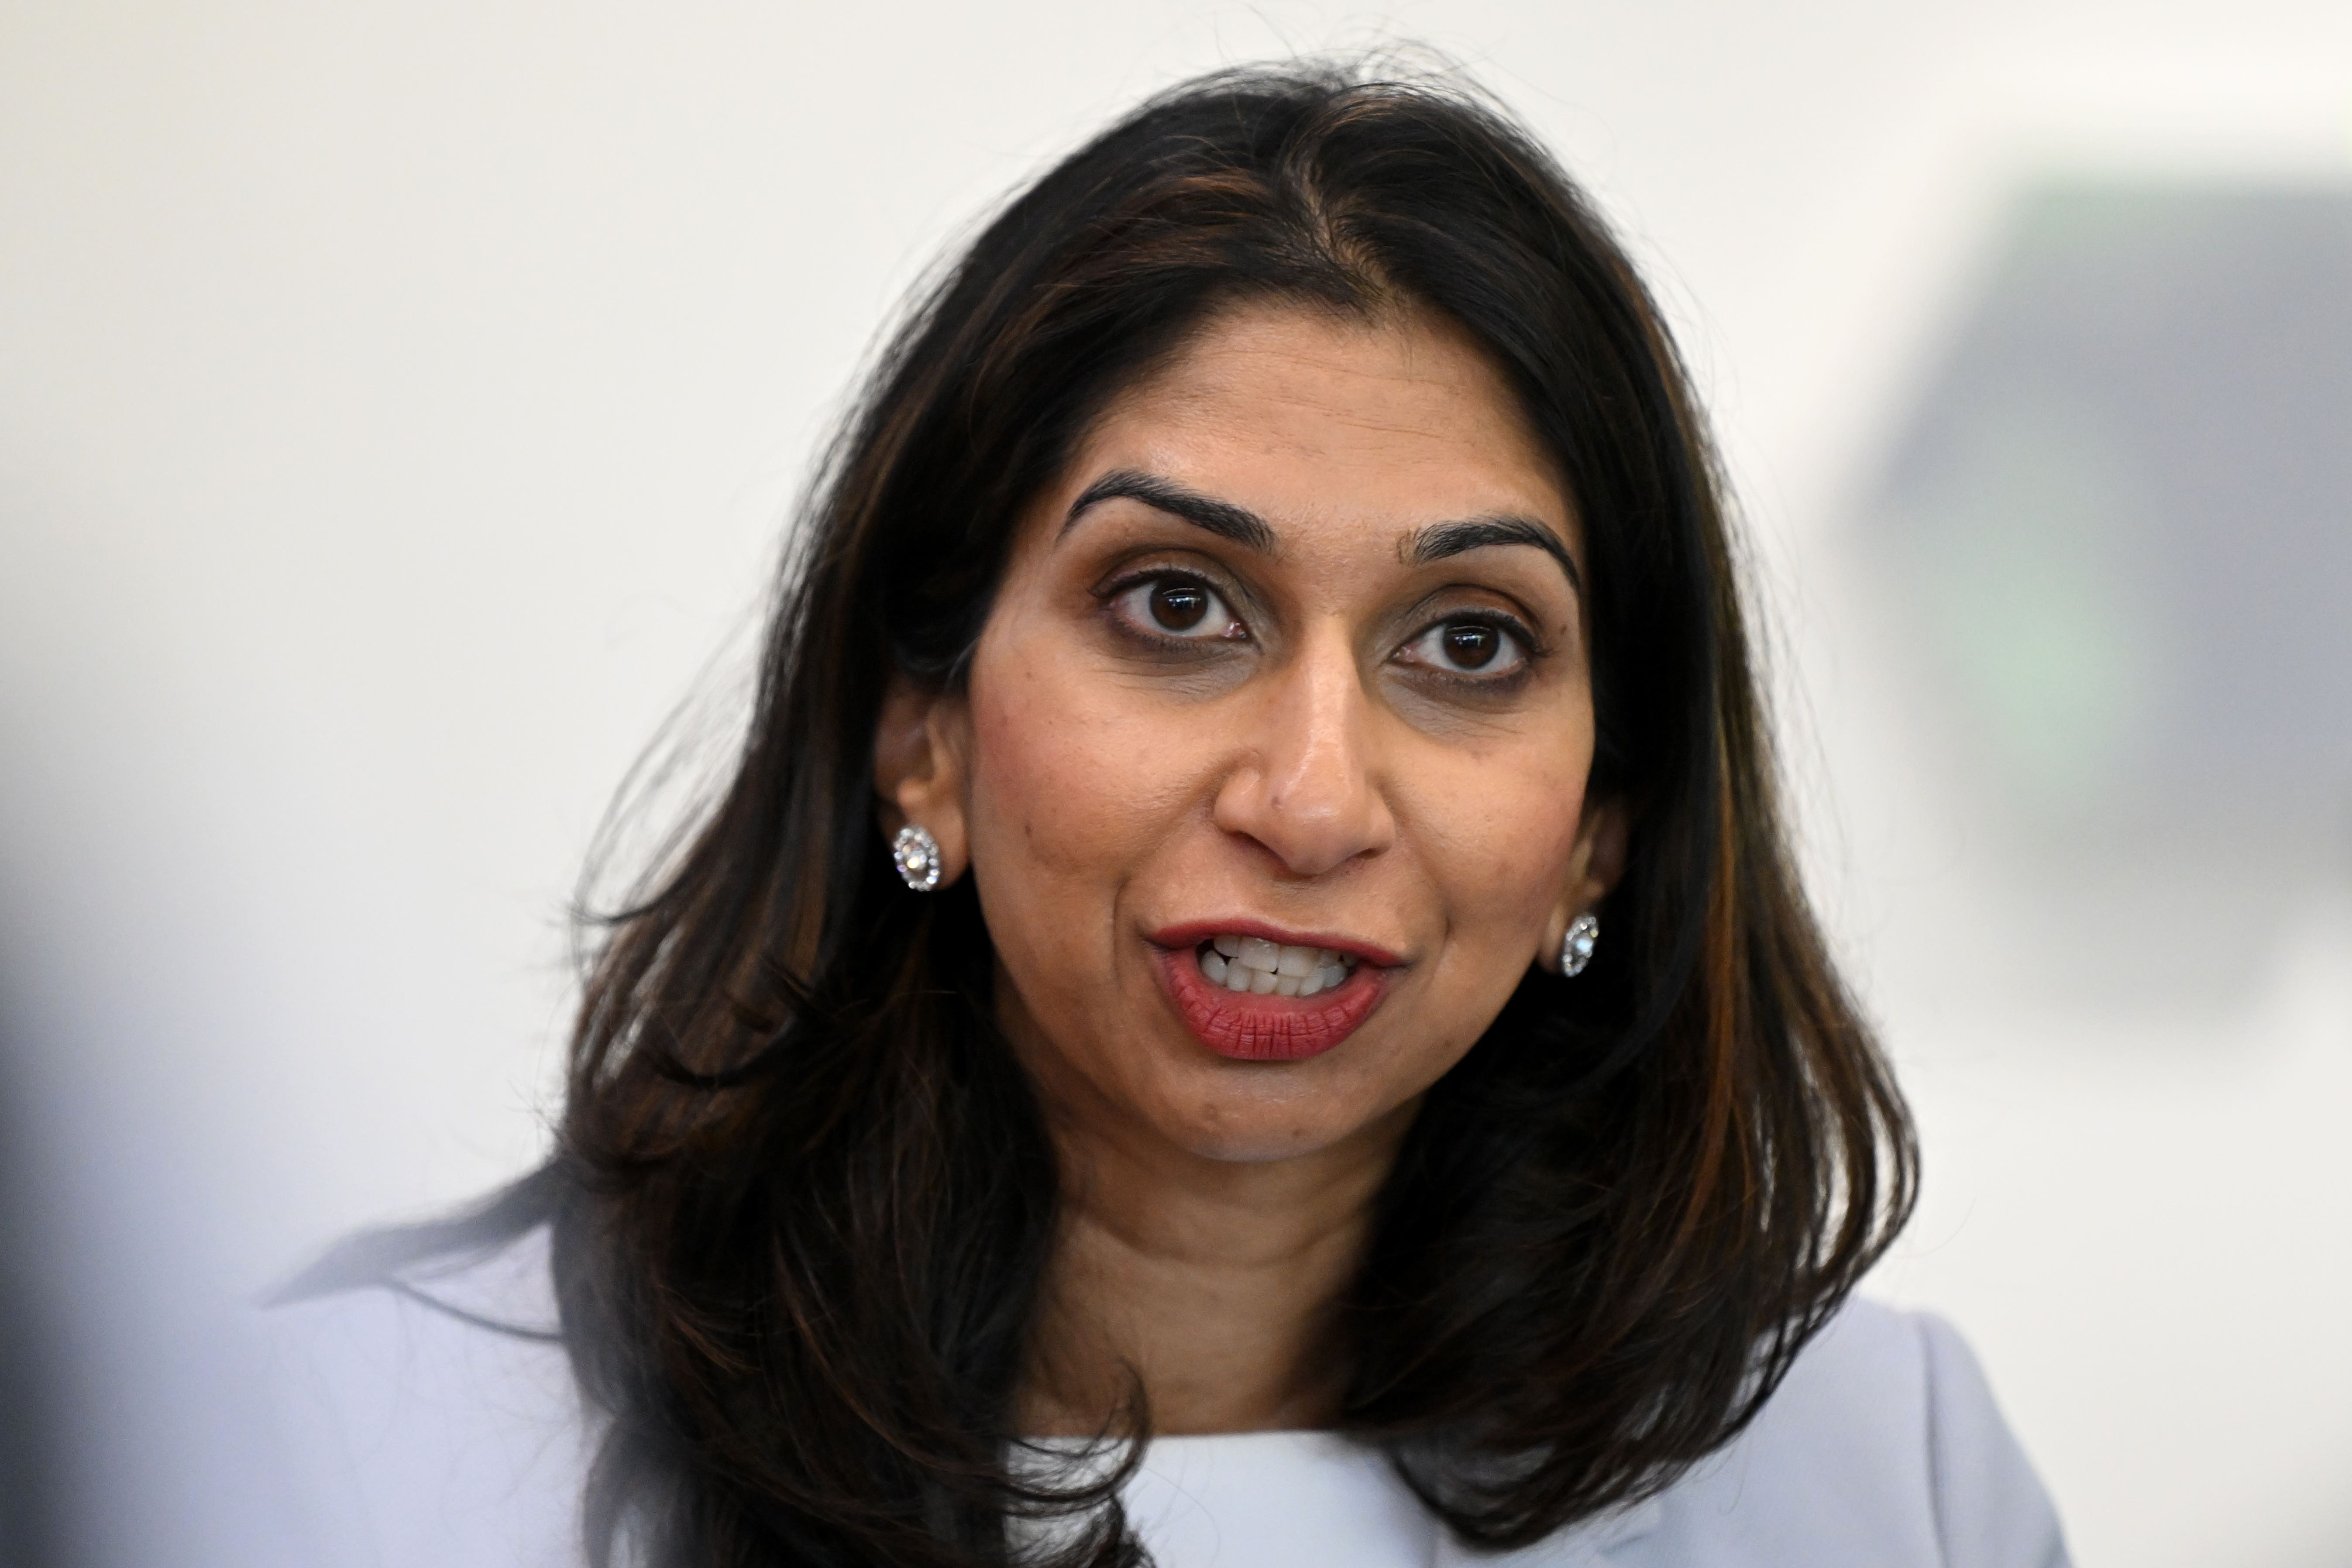 The former home secretary Suella Braverman spear-headed the Police, Crime, Sentencing and Courts Act in 2022